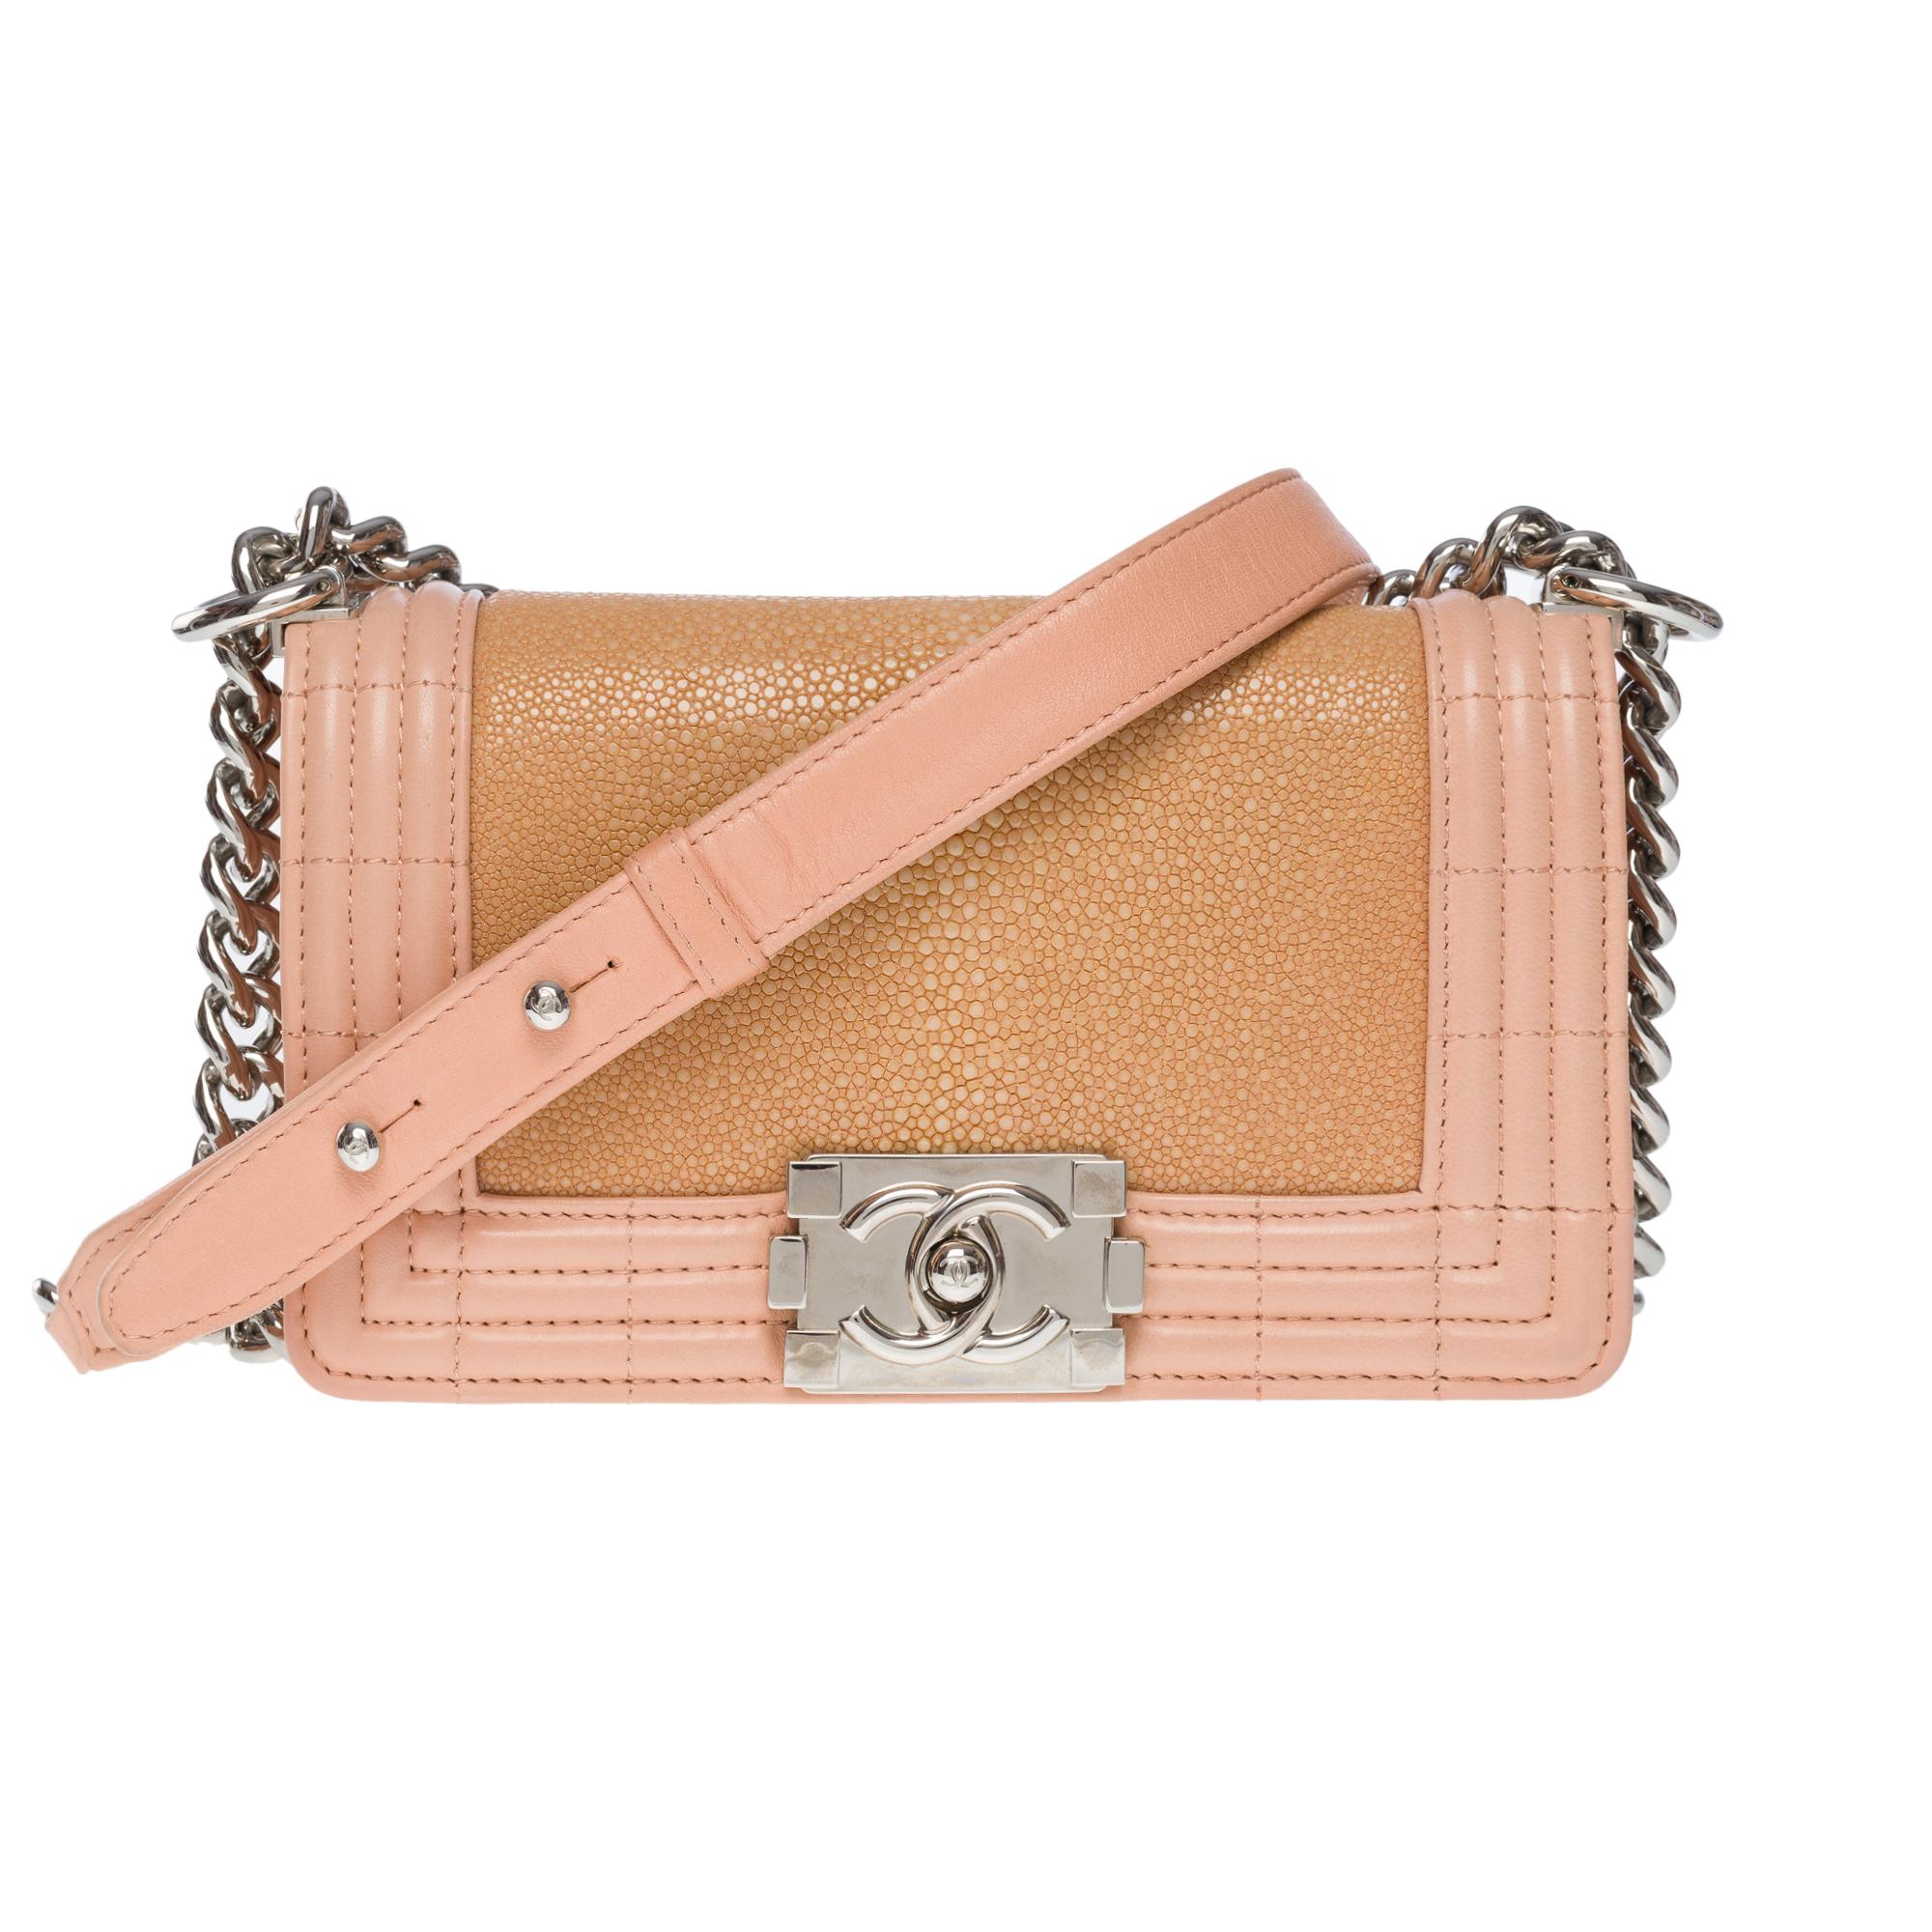 Exquisite Chanel Mini Boy shoulder bag limited edition in Pink shagreen and leather, shiny silver metal hardware, an adjustable silver metal chain allowing a hand, shoulder and shoulder strap carry

Flap closure on silver metal clasp
Grey canvas